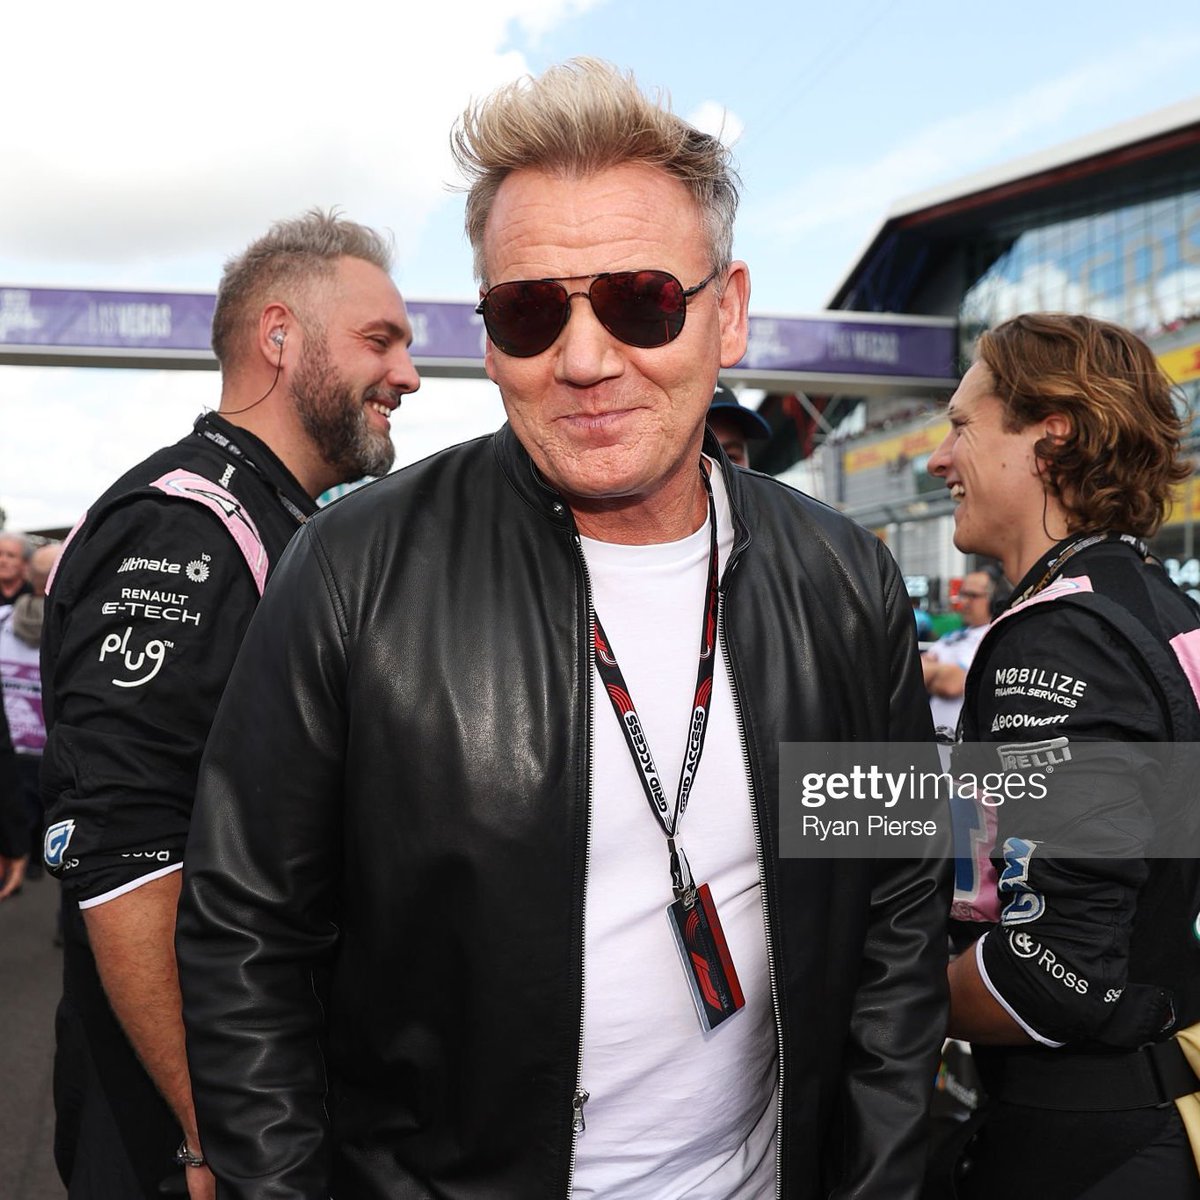 Gordon Ramsay looks on from the grid prior to the F1 Grand Prix of Great Britain at Silverstone Circuit on July 09, 2023 in Northampton, England. https://t.co/9Nkt2LjEoT